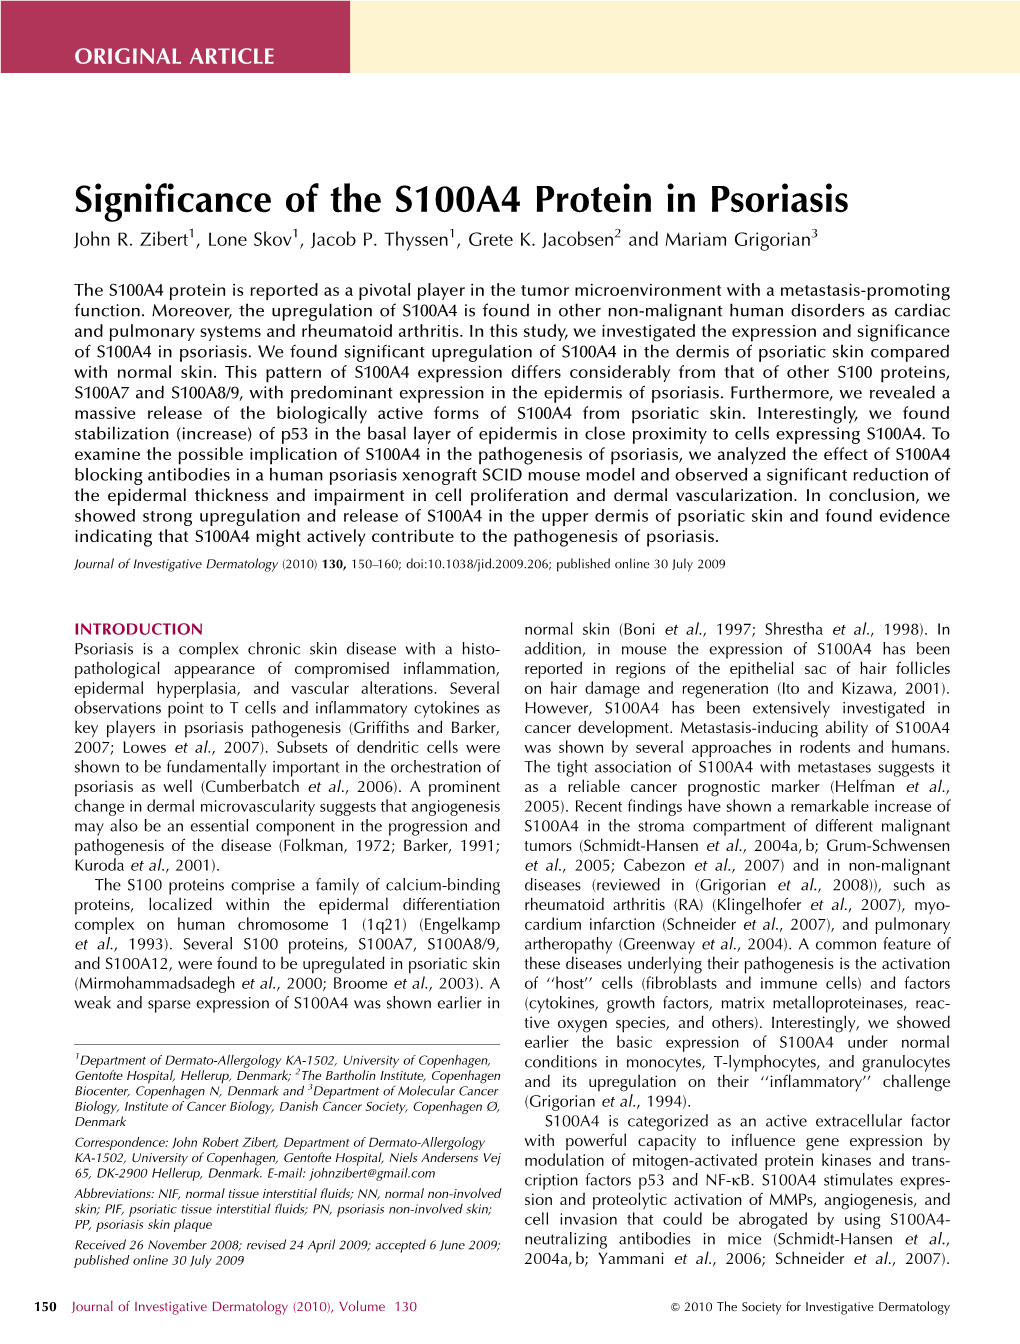 Significance of the S100A4 Protein in Psoriasis John R